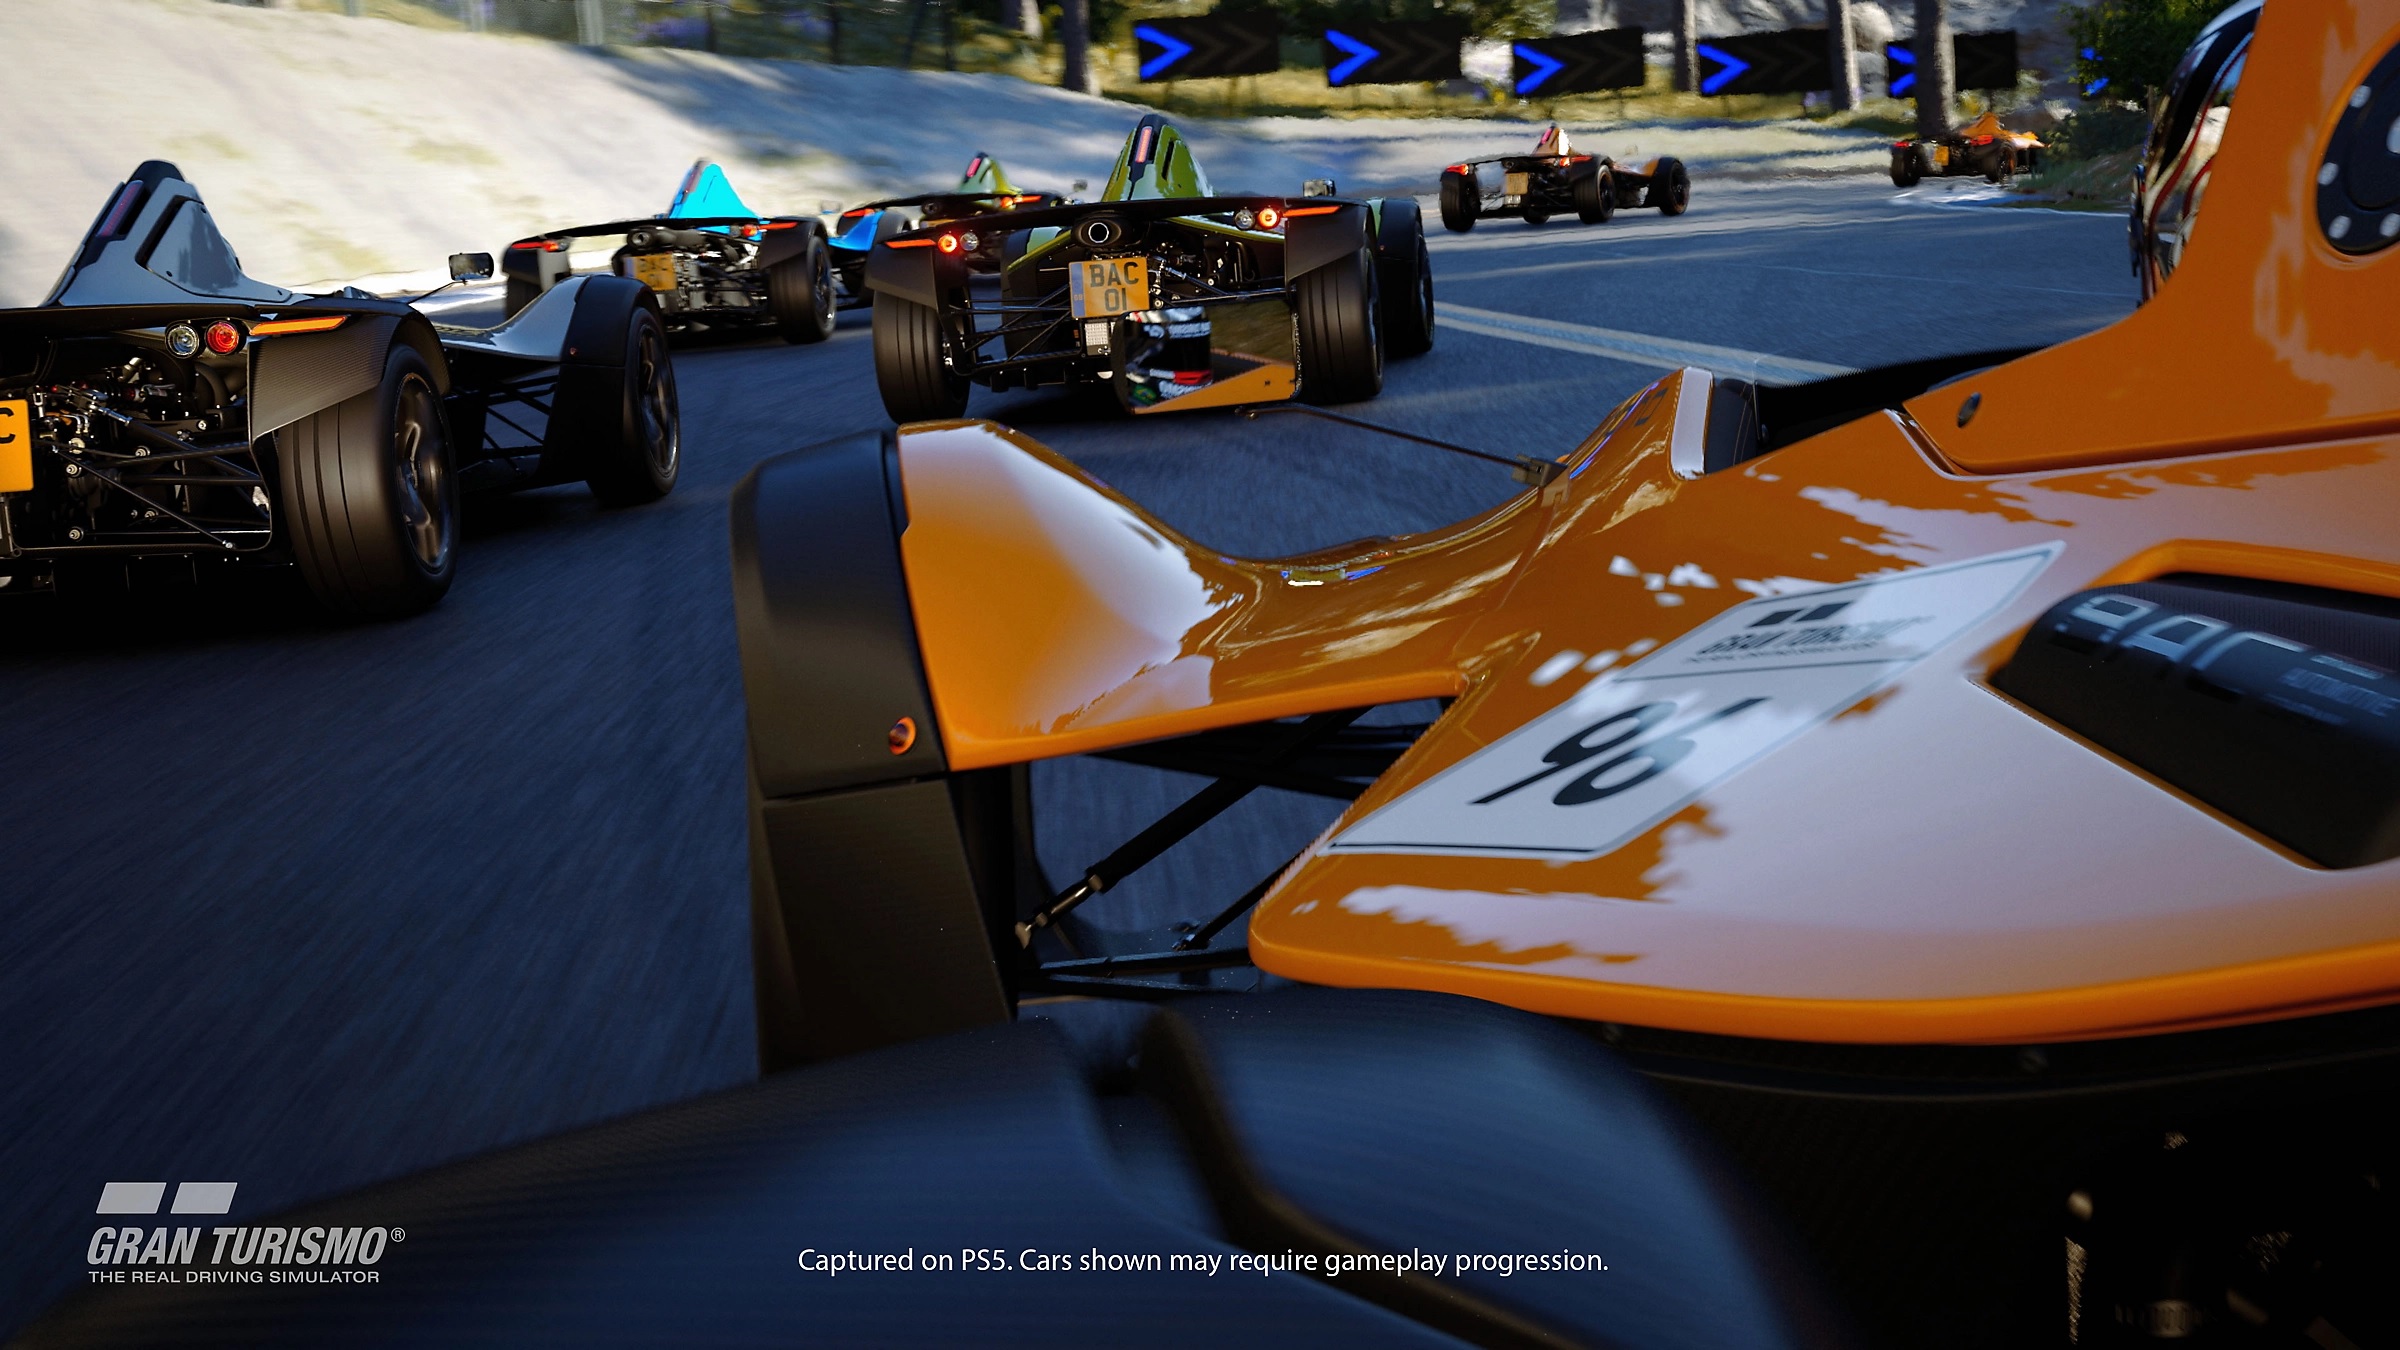 Gran Turismo 7 brings a wide customization system for your cars